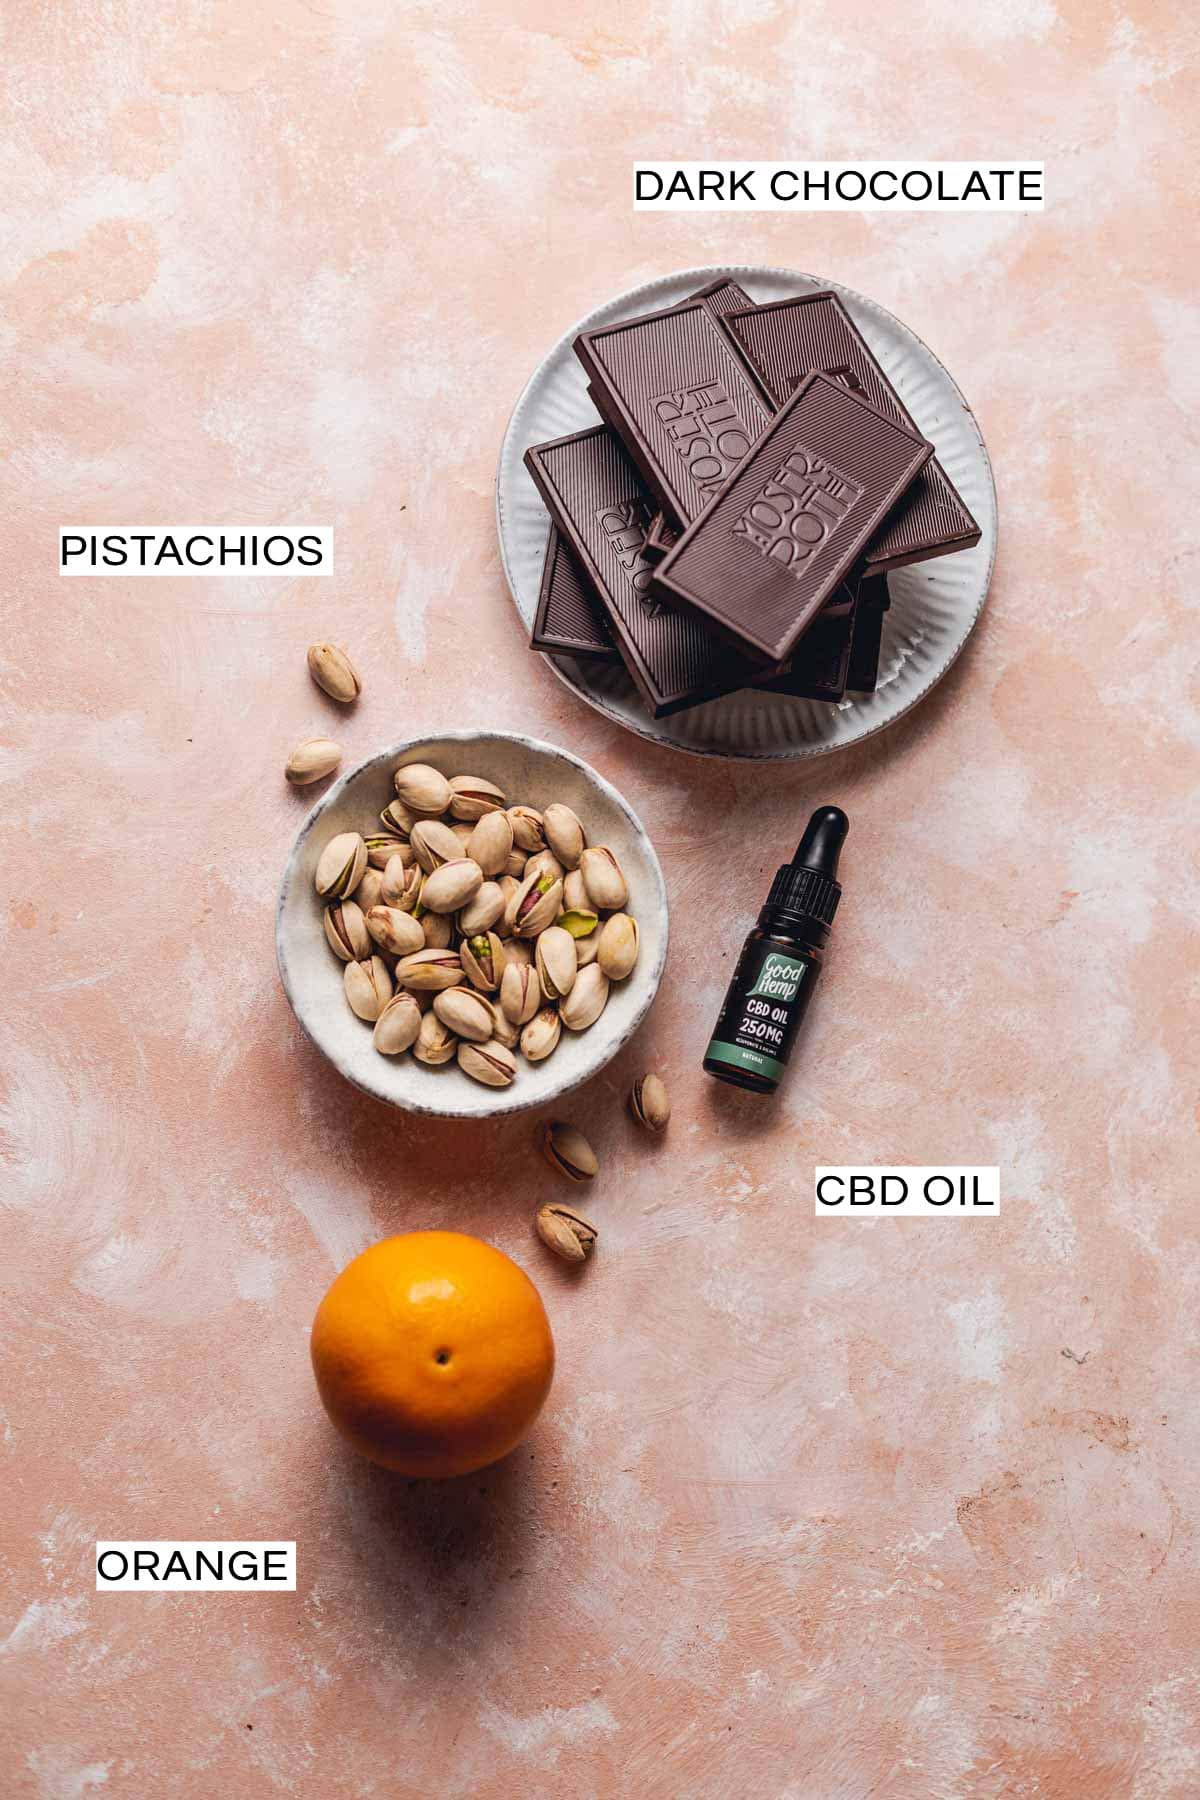 Chocolate, pistachios, orange and CBD oil placed on a flat surface. 